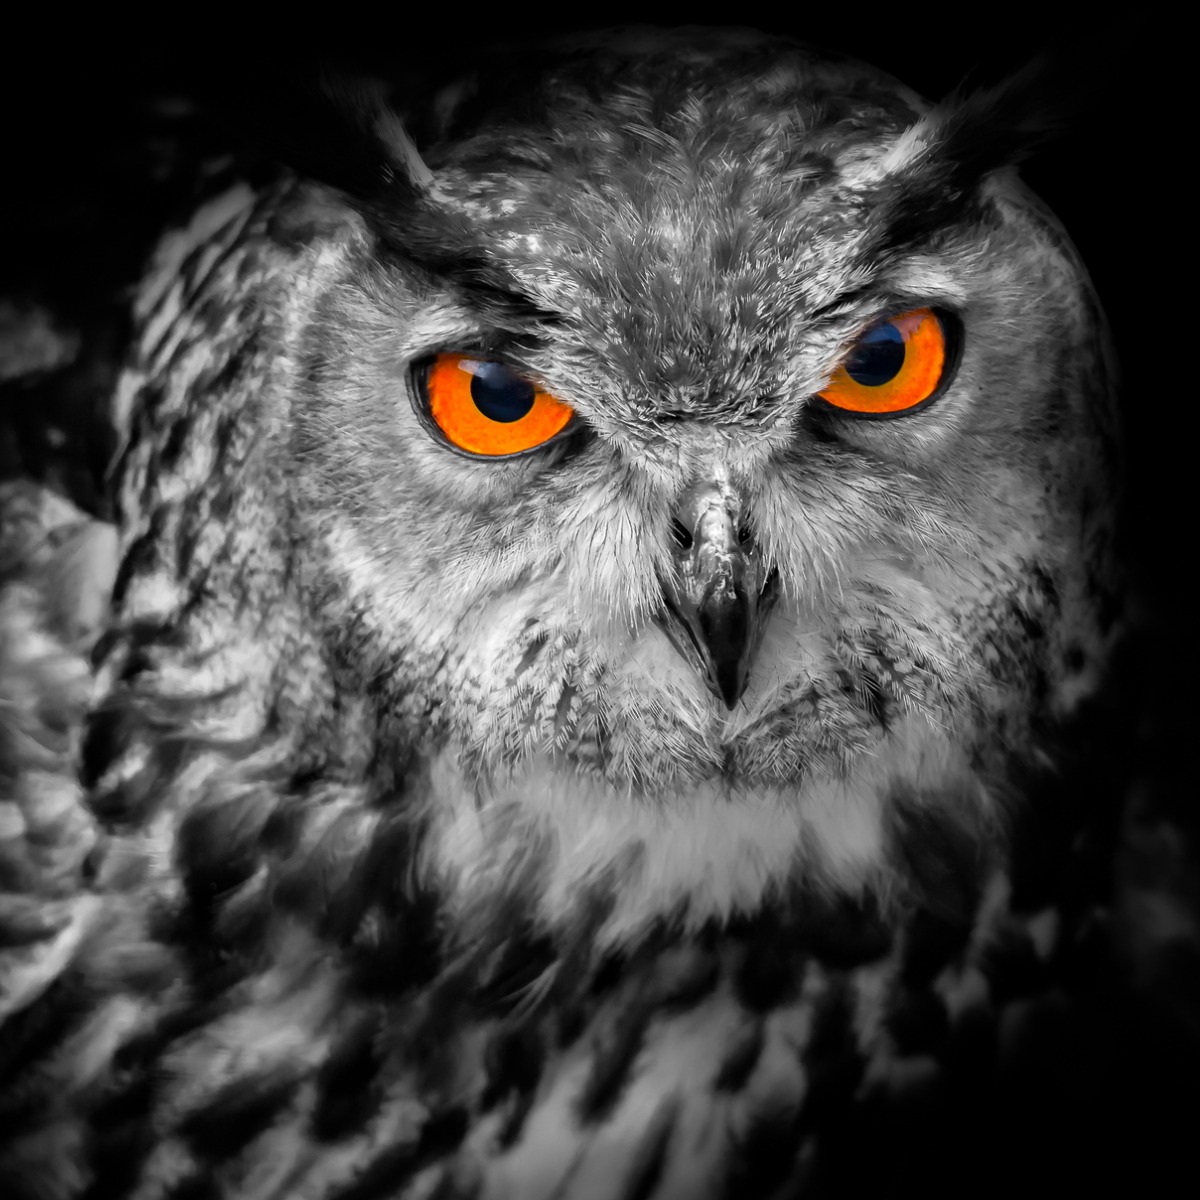 owl-with-orange-eyes-picture-id1355972644 (1)